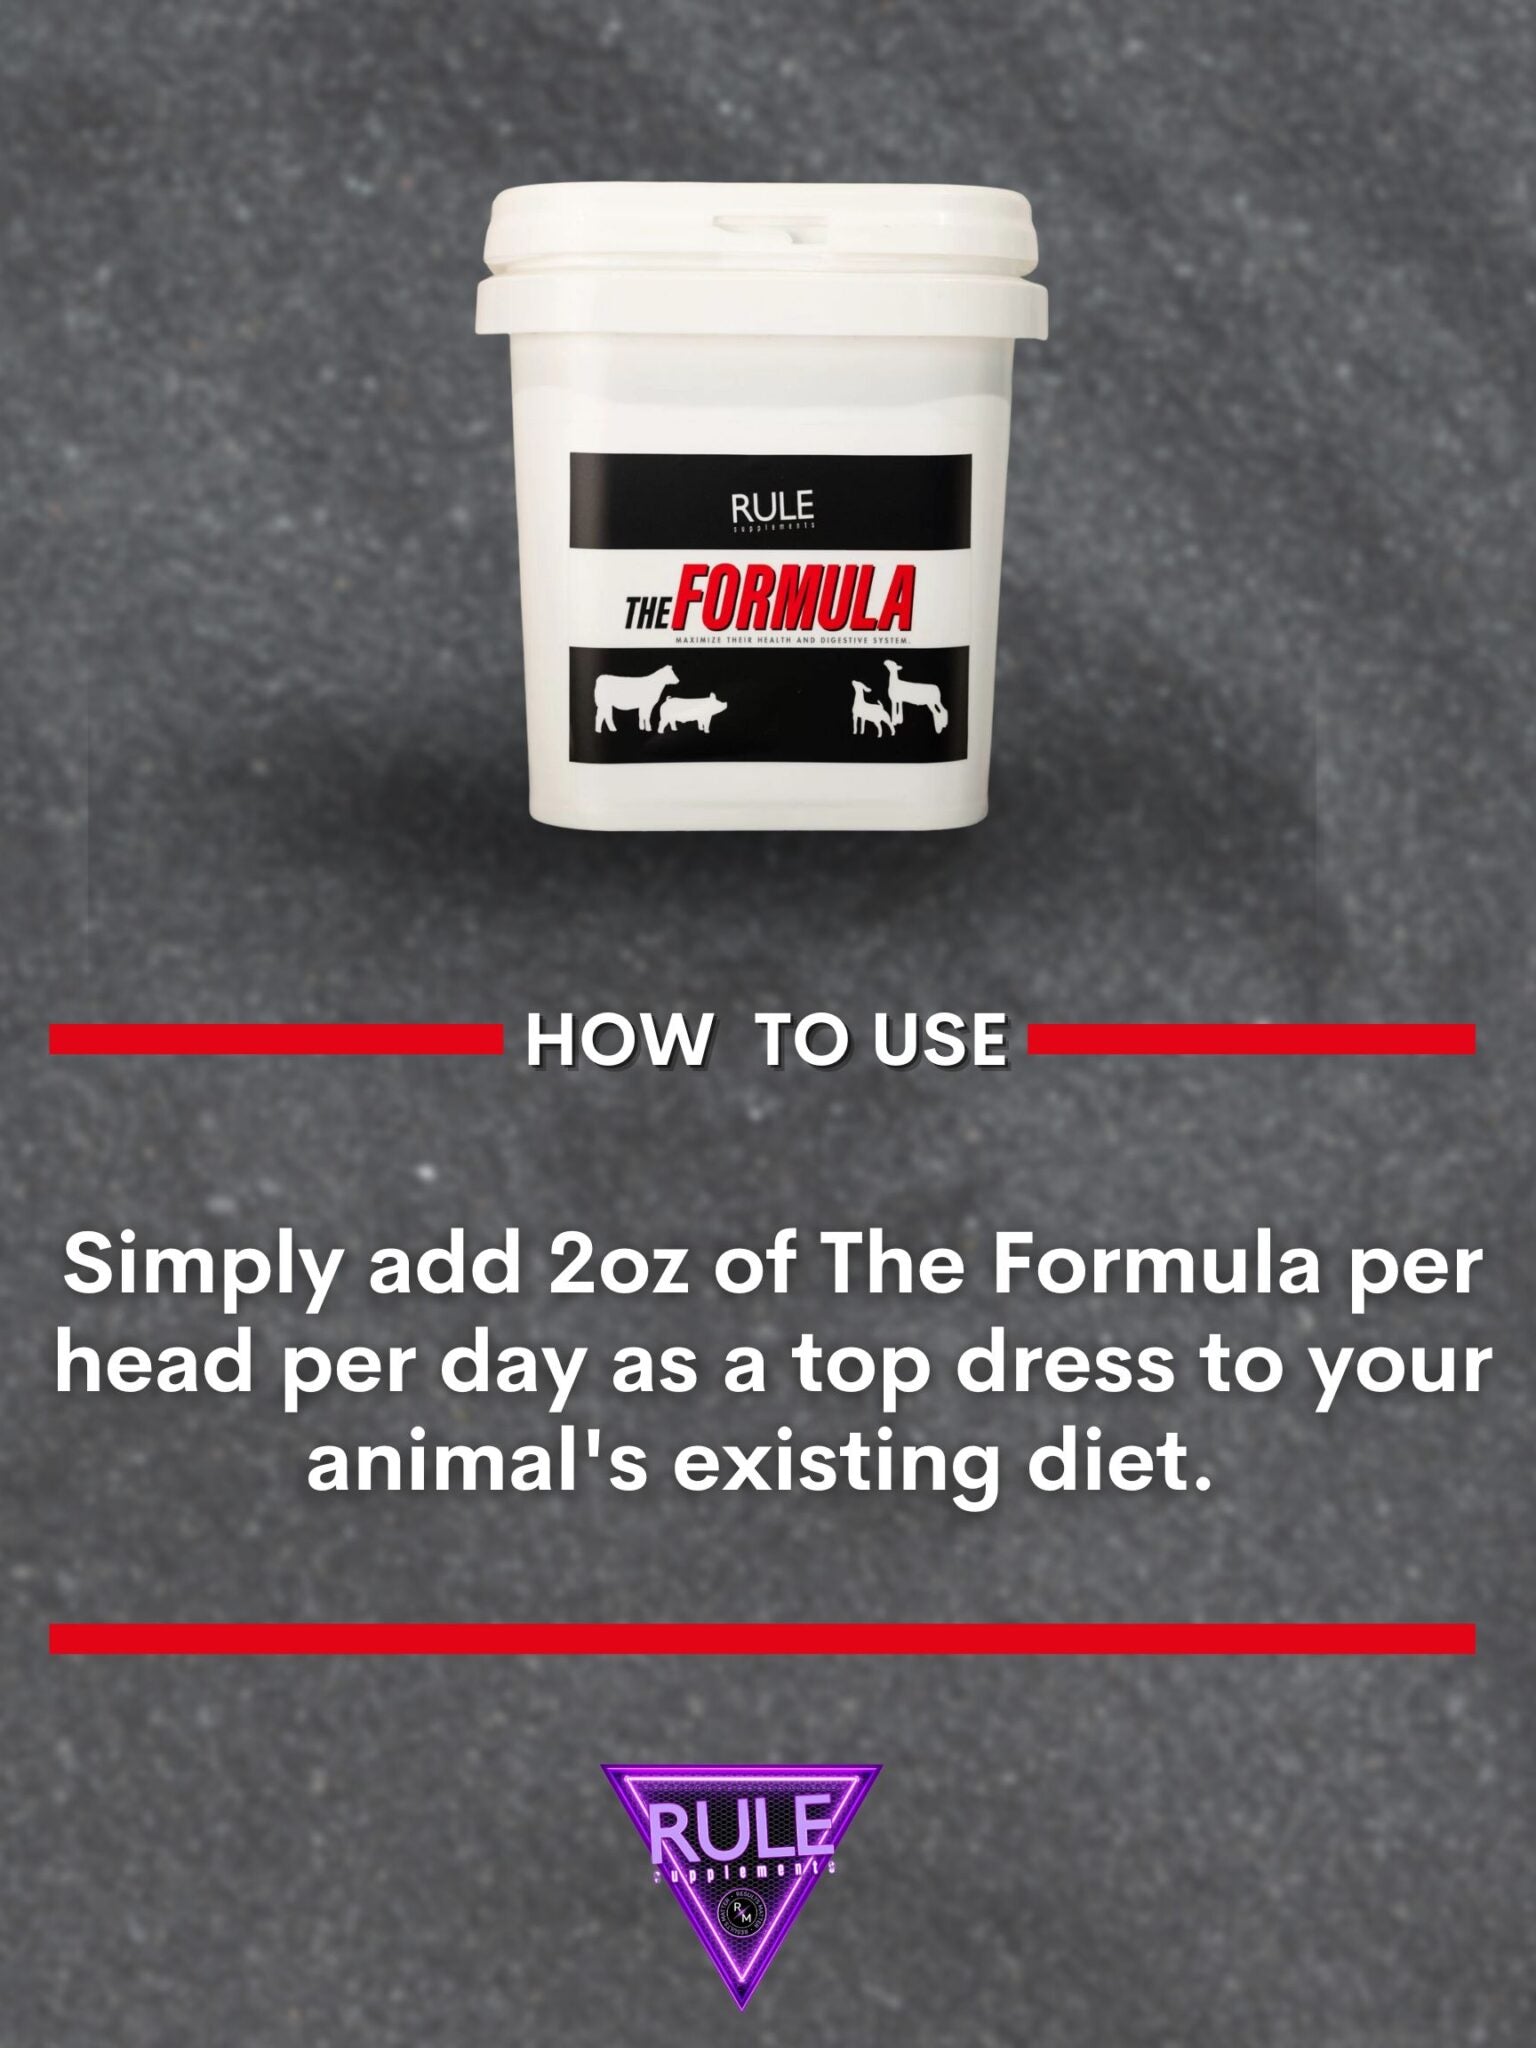 HOW TO USE The Formula